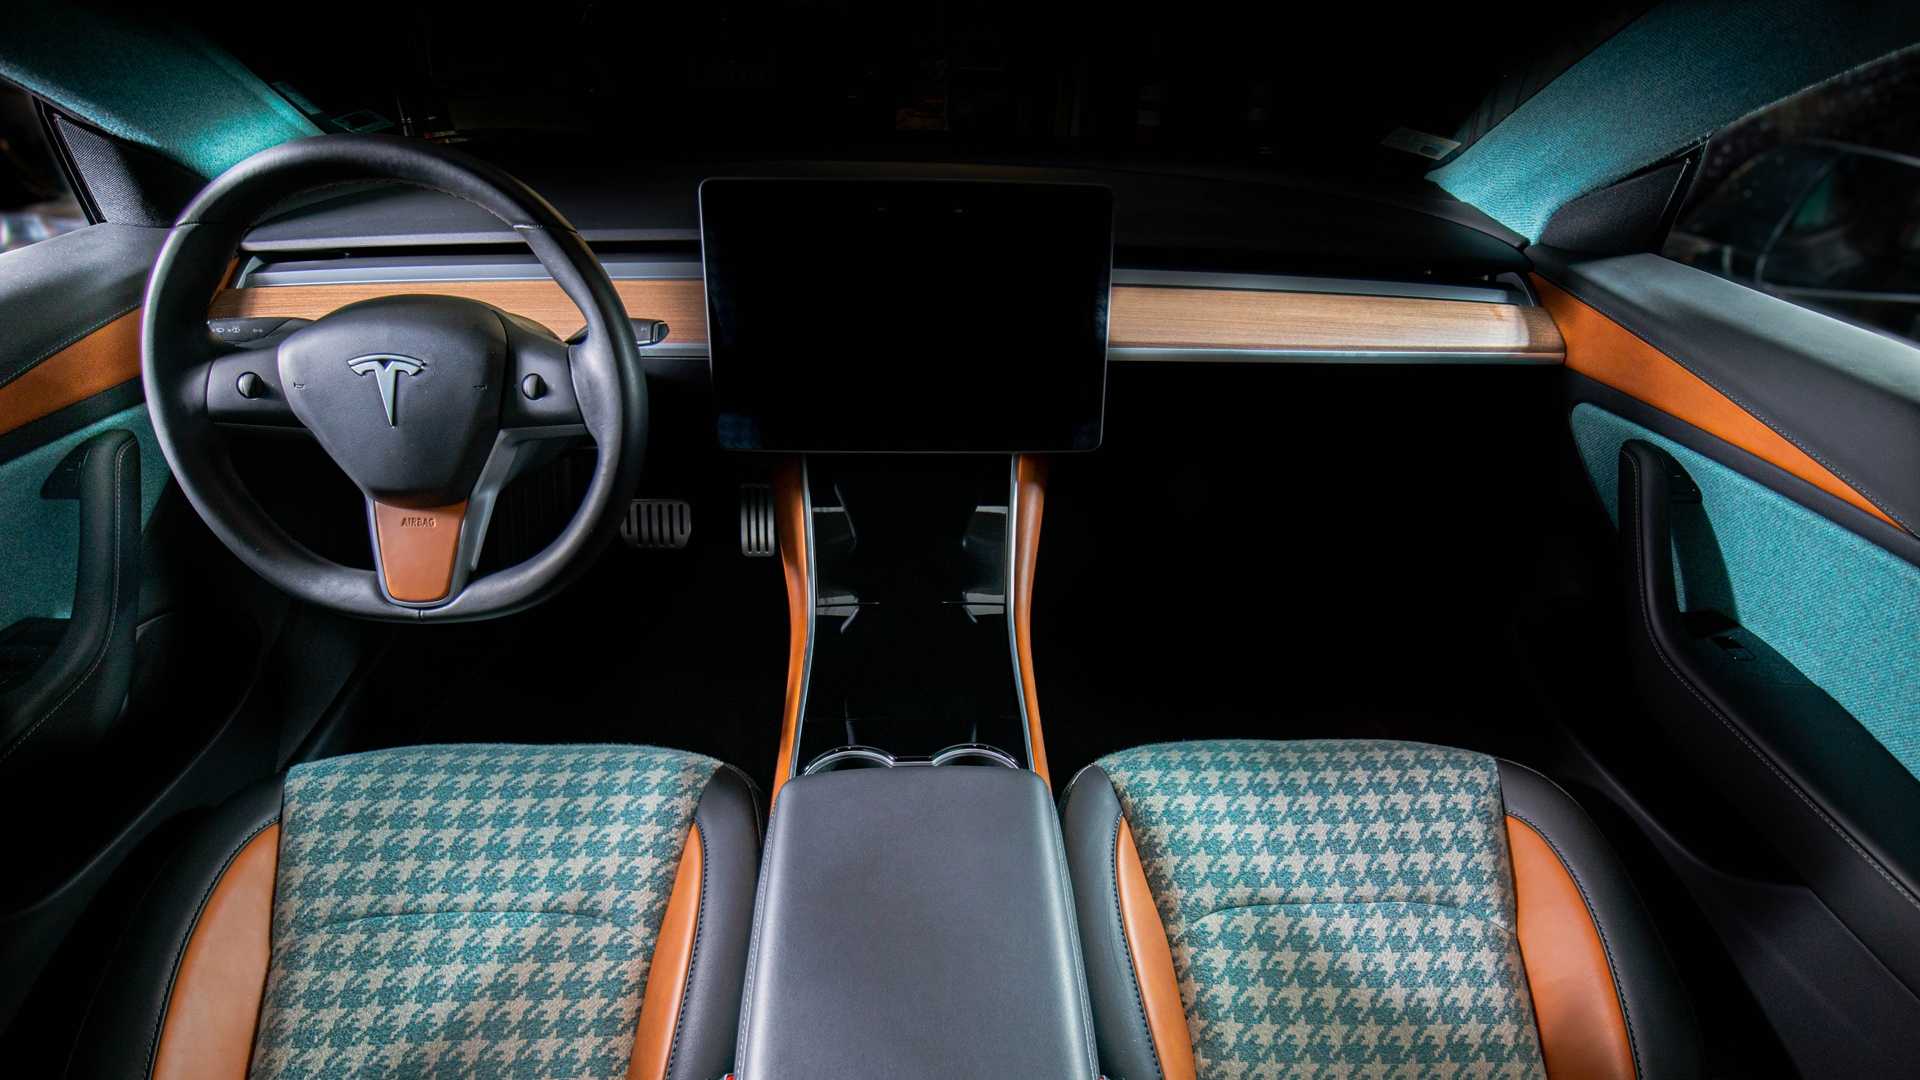 Vilner Blings Tesla Model 3 Interior With Houndstooth And Turquoise